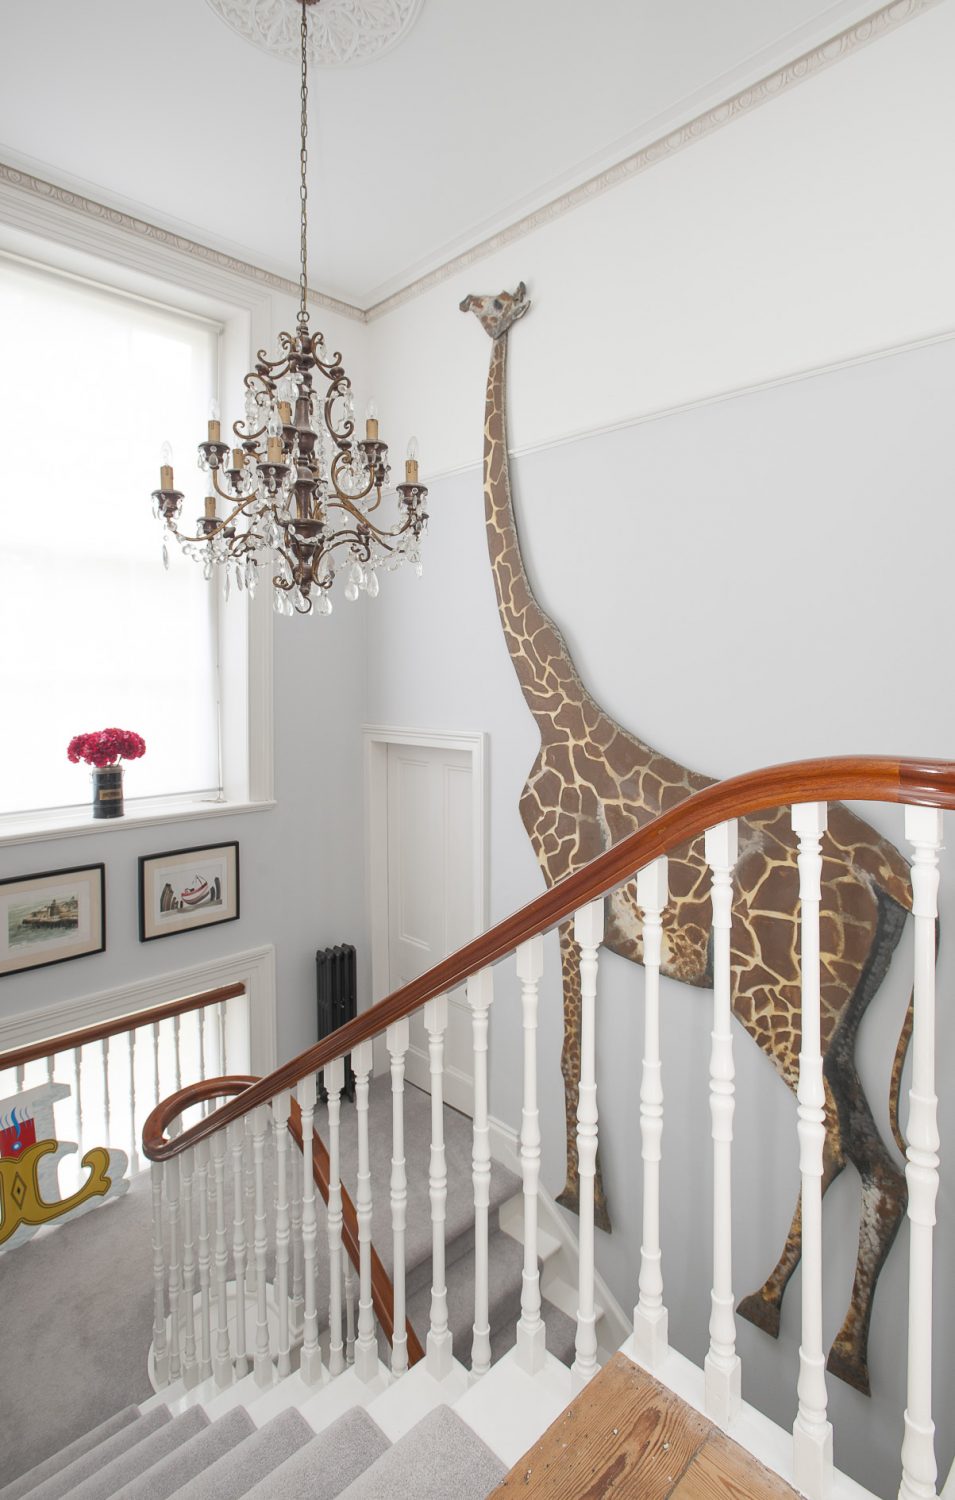 A full sized cut-out of a giraffe reaches virtually from the ground to first floor